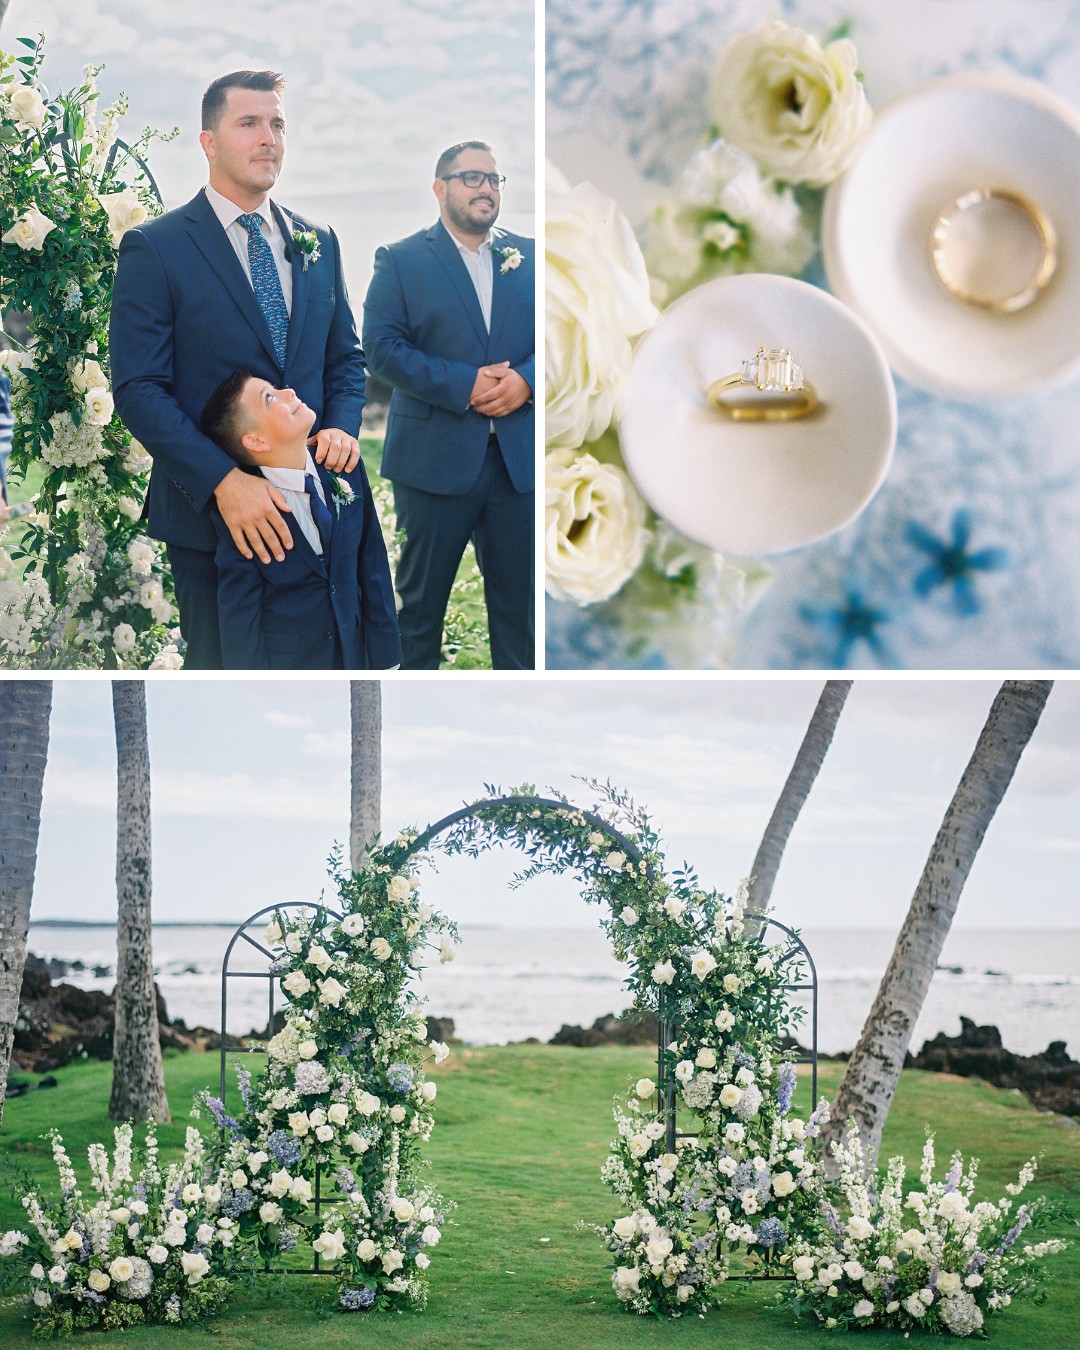 blue and white ceremony arch, groom at altar with son, bride's ring